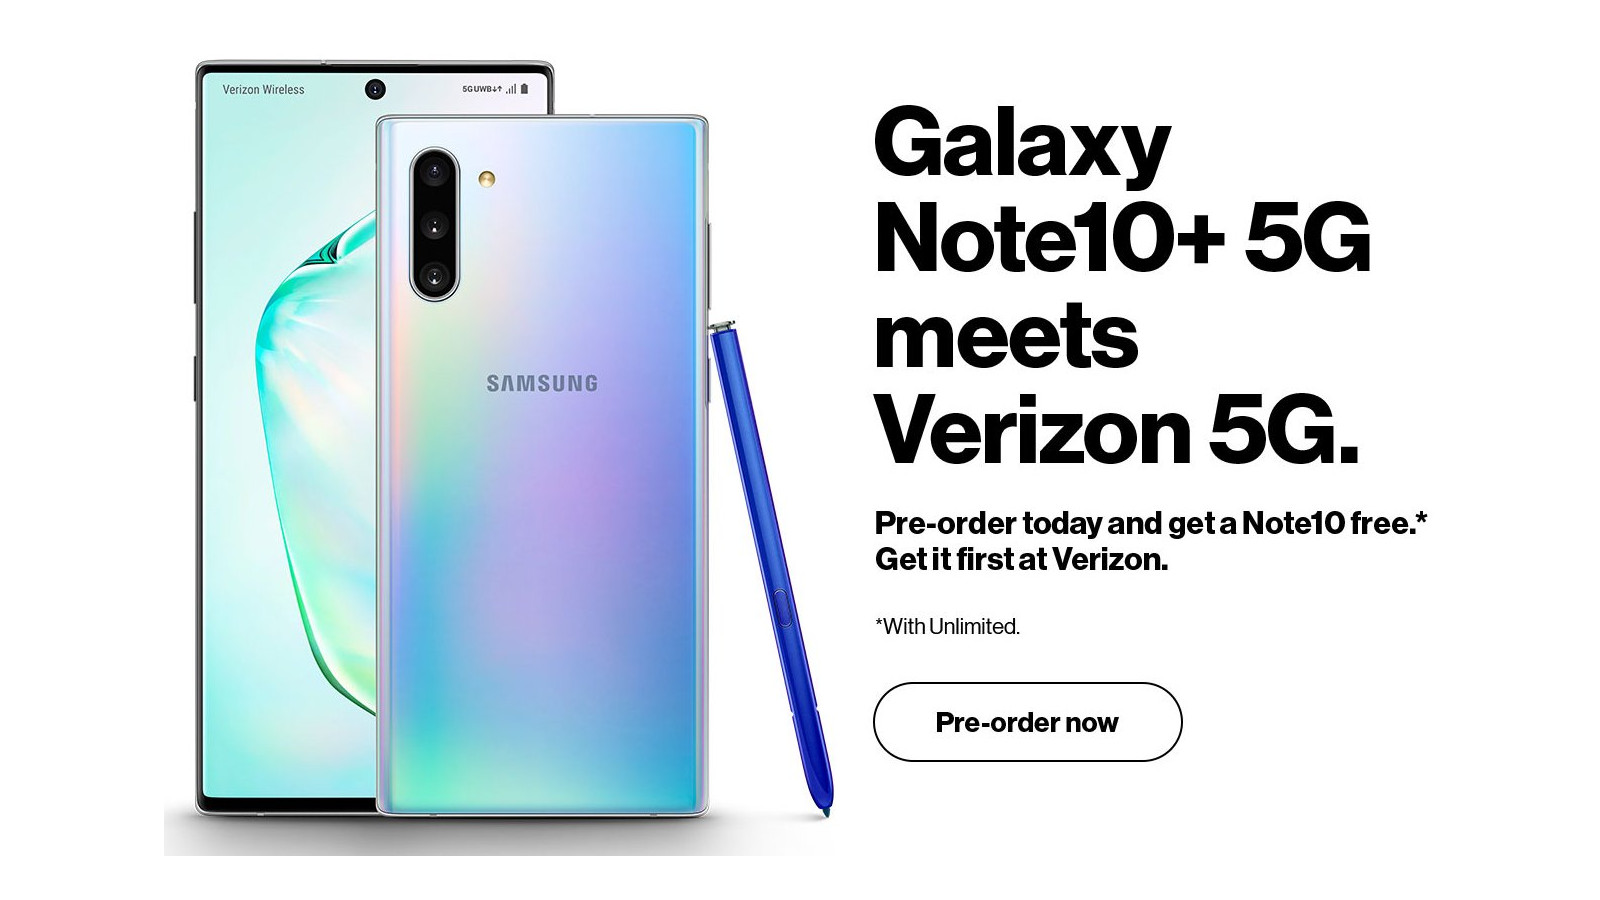 A leaked image showing the Samsung Galaxy Note 10 Plus 5G.